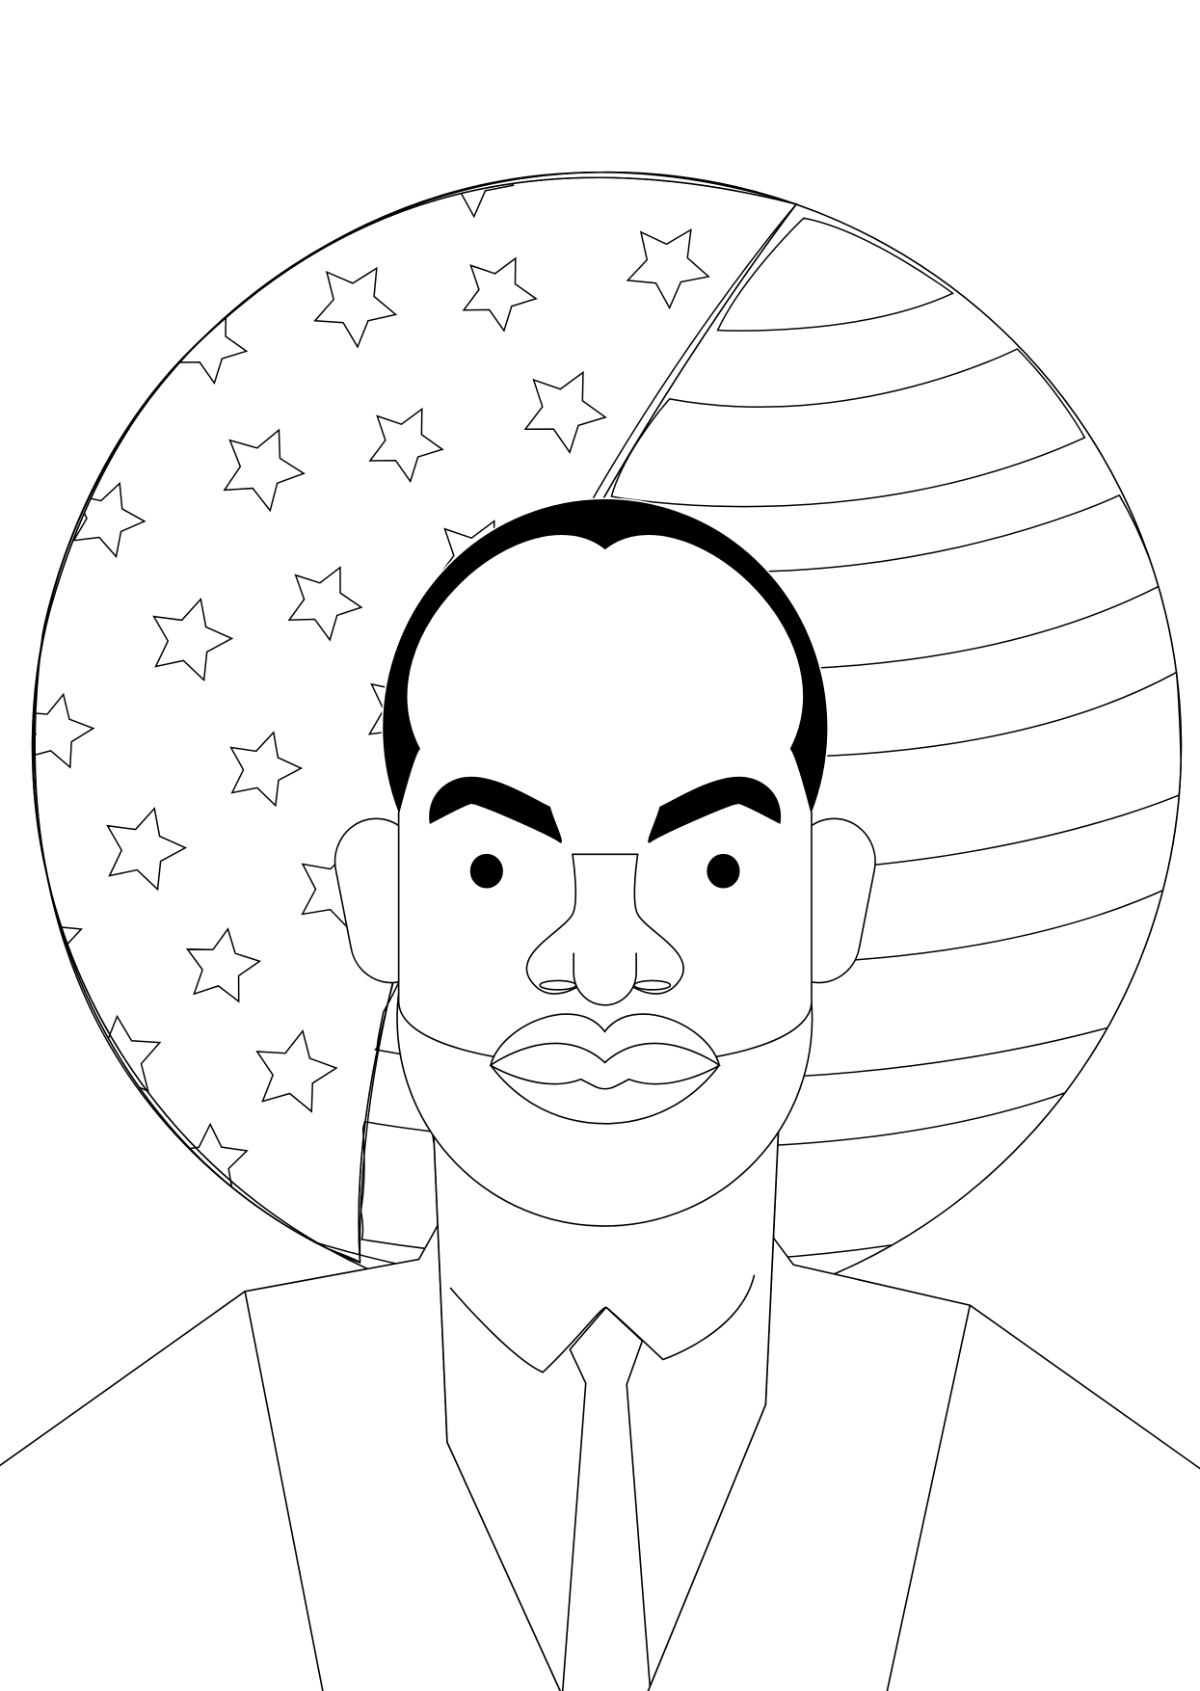 Martin Luther King Coloring Pages for Preschoolers